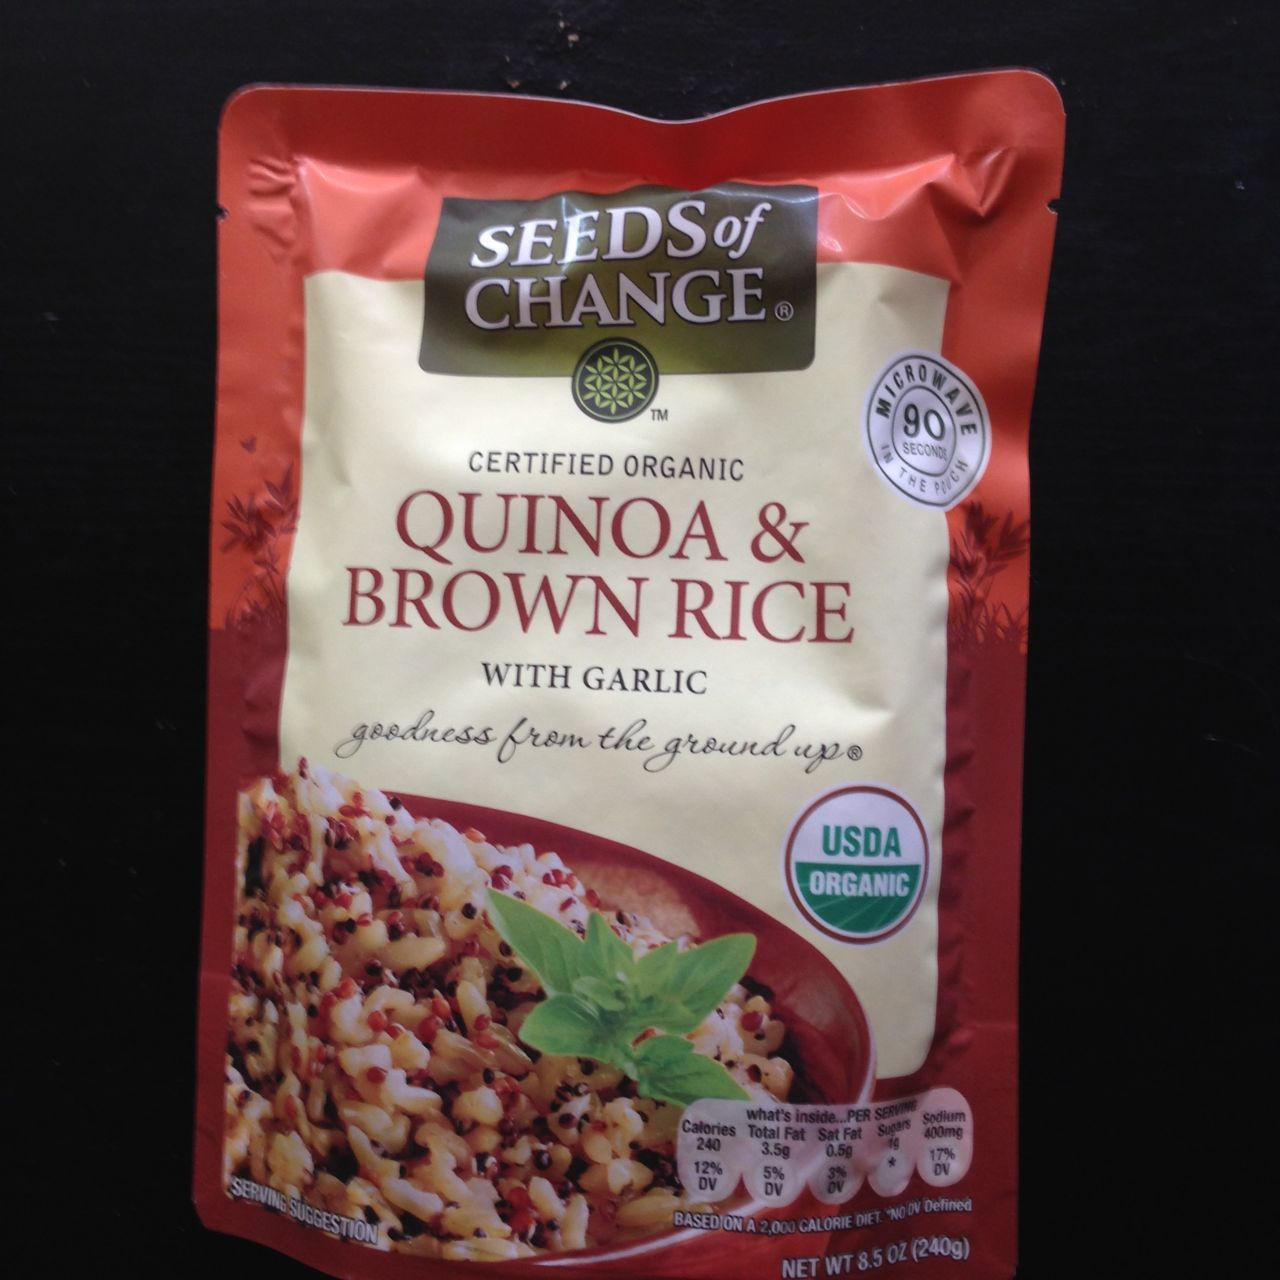 Seeds Of Change Quinoa And Brown Rice Gluten Free
 Seeds of Change quinoa & brown rice free with mailed